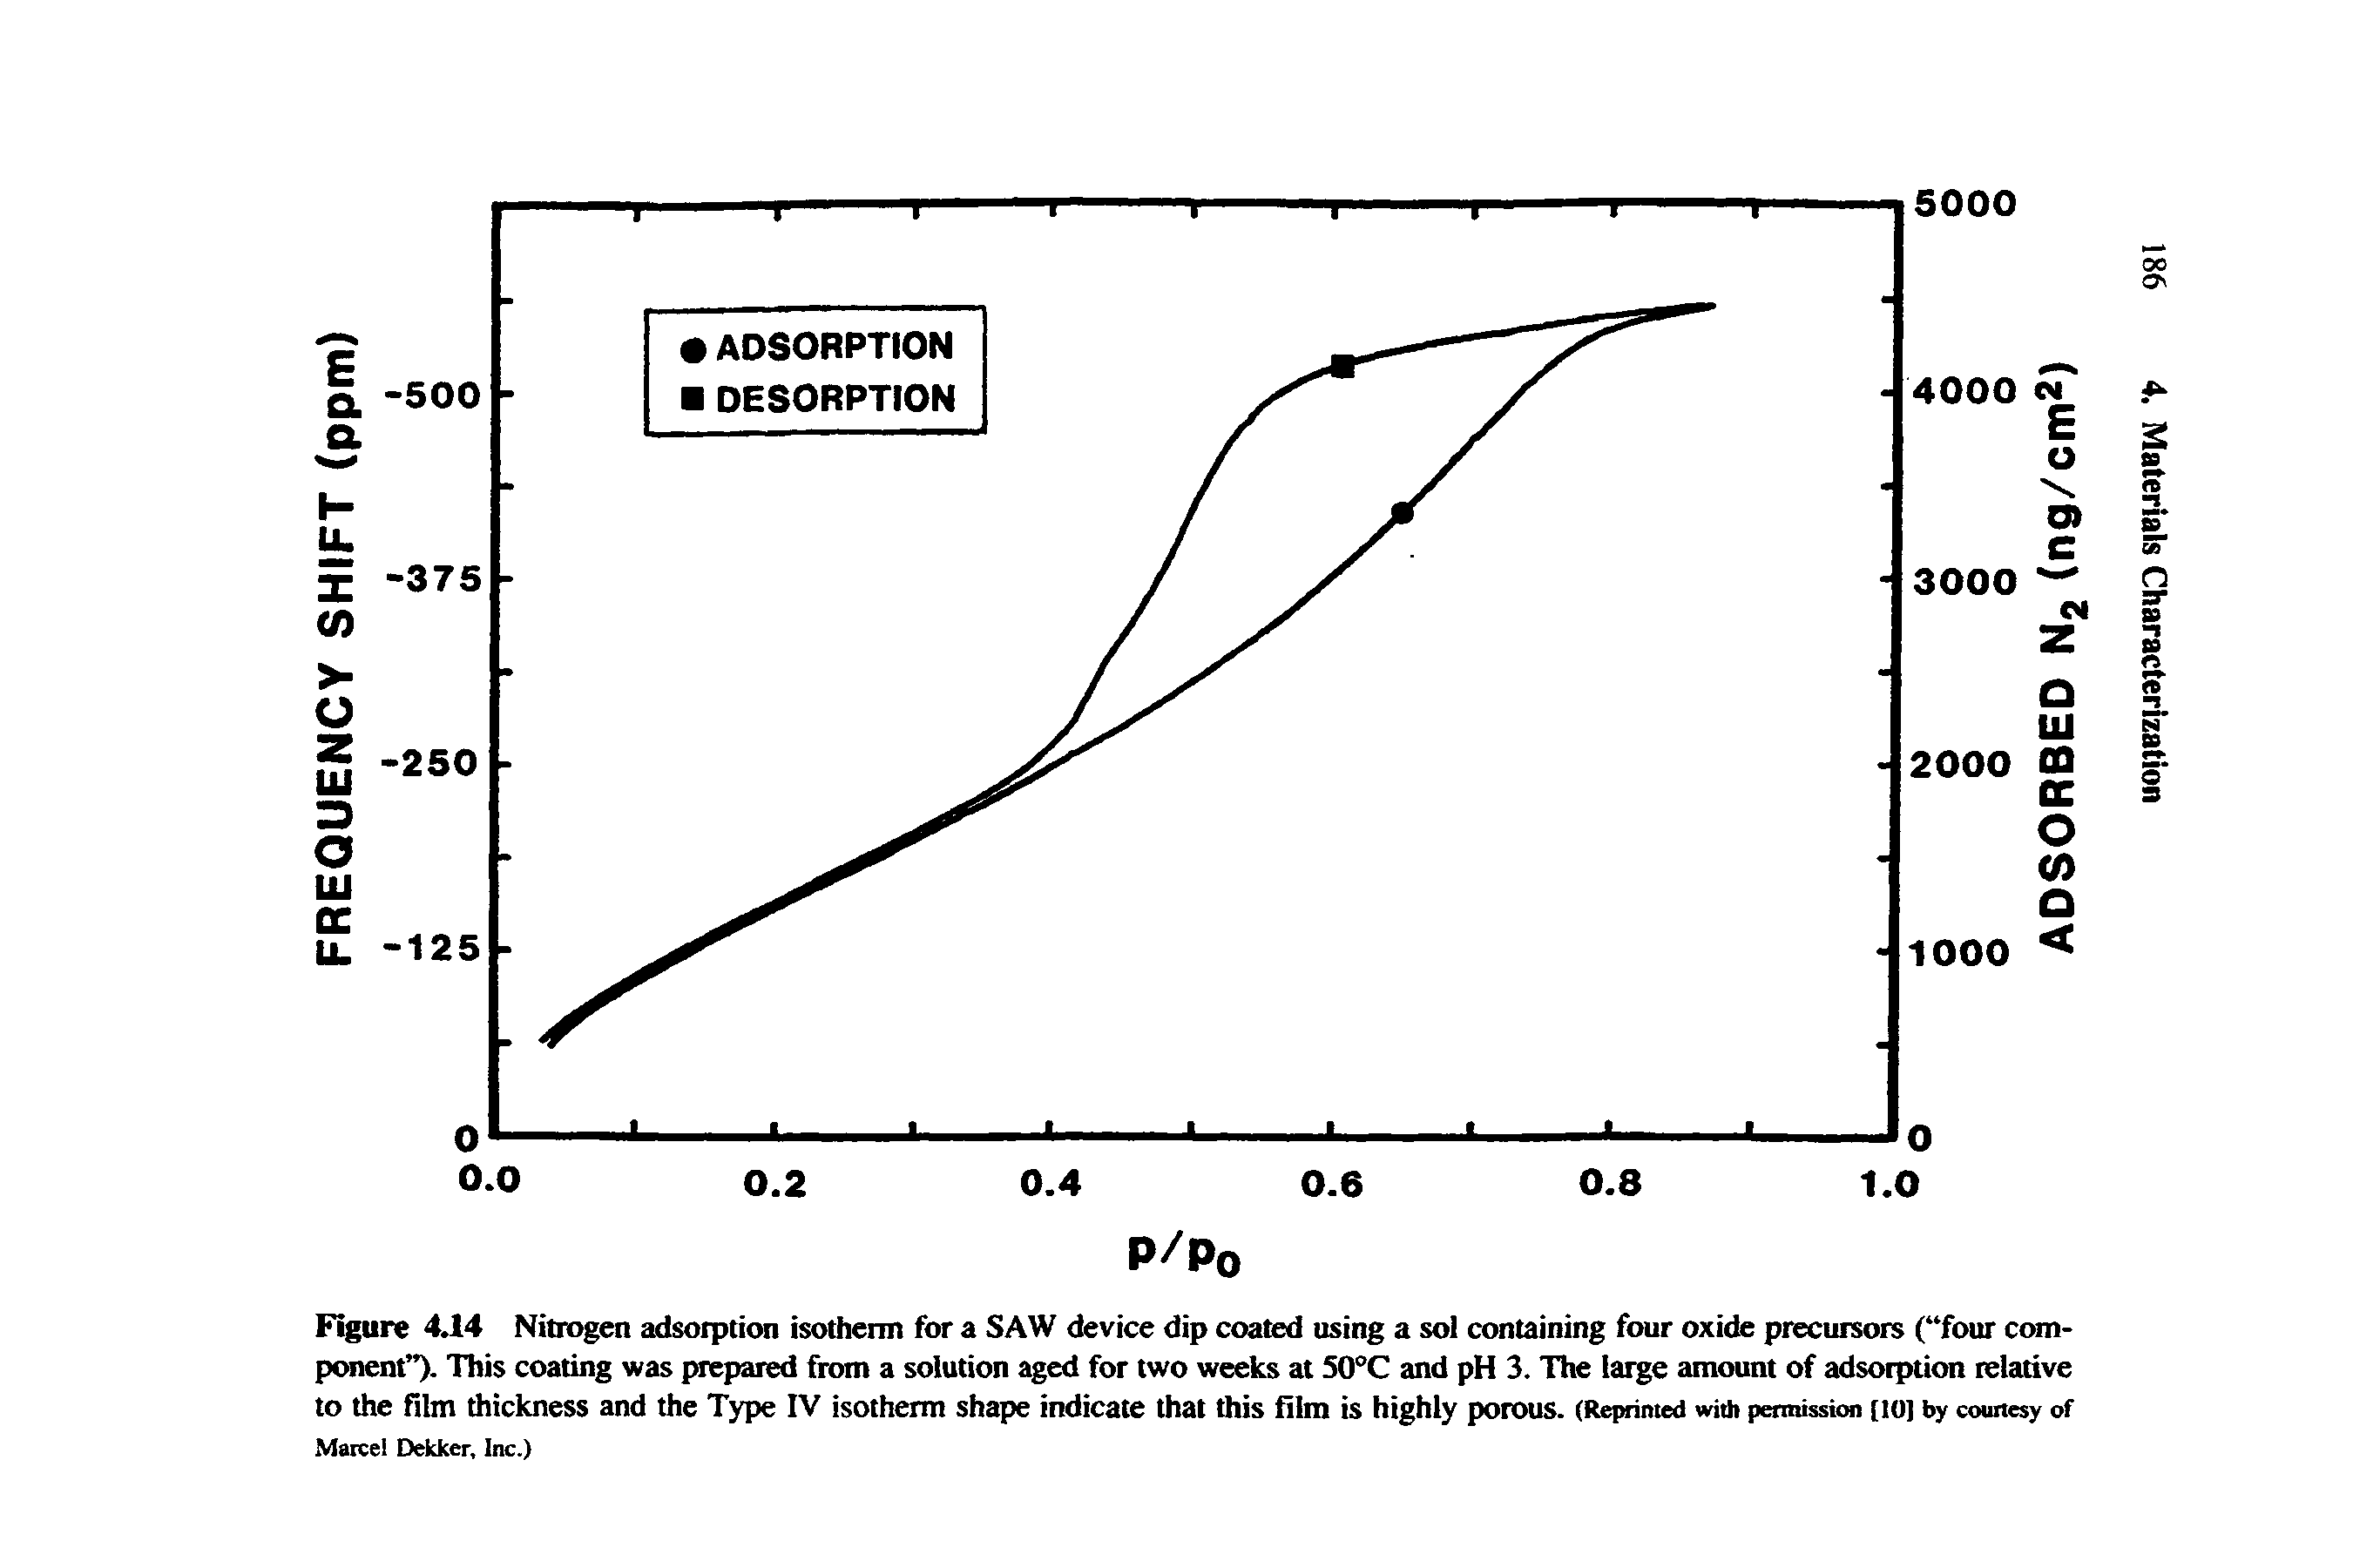 Figure 4.14 Nitrogen adsorption isotherm for a SAW device dip coated using a sol containing four oxide precursors ( four component ). This coating was prepared from a solution aged for two weeks at S0°C and pH 3. The large amount of adsorption relative to the film thickness and the Type IV isotherm shapie indicate that this film is highly porous. (Reprinted with permission [lo] by counesy of...